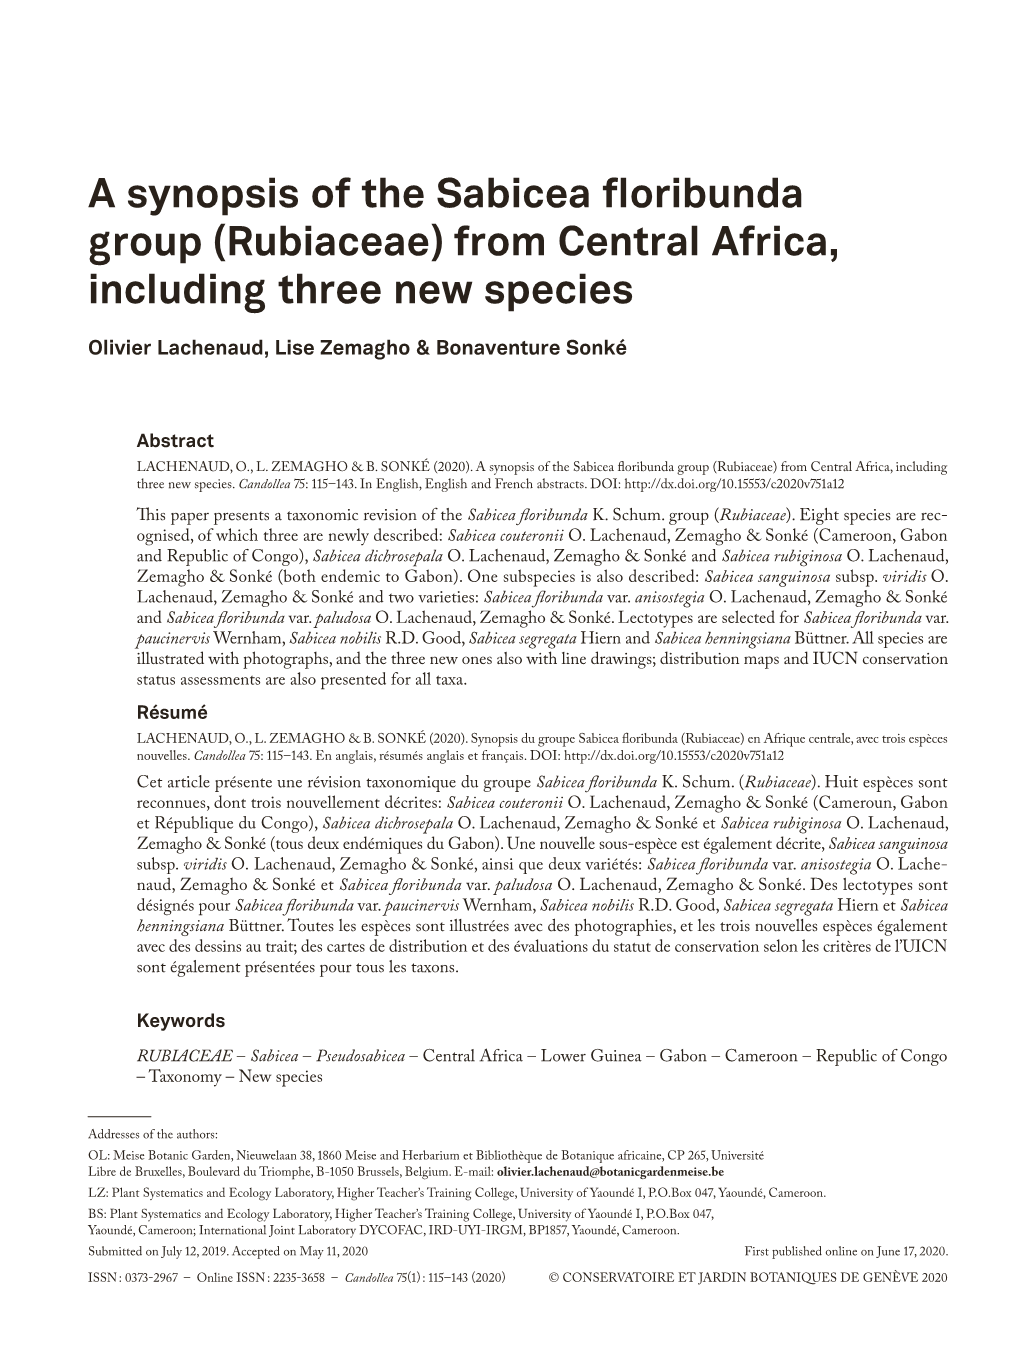 A Synopsis of the Sabicea Floribunda Group (Rubiaceae) from Central Africa, Including Three New Species